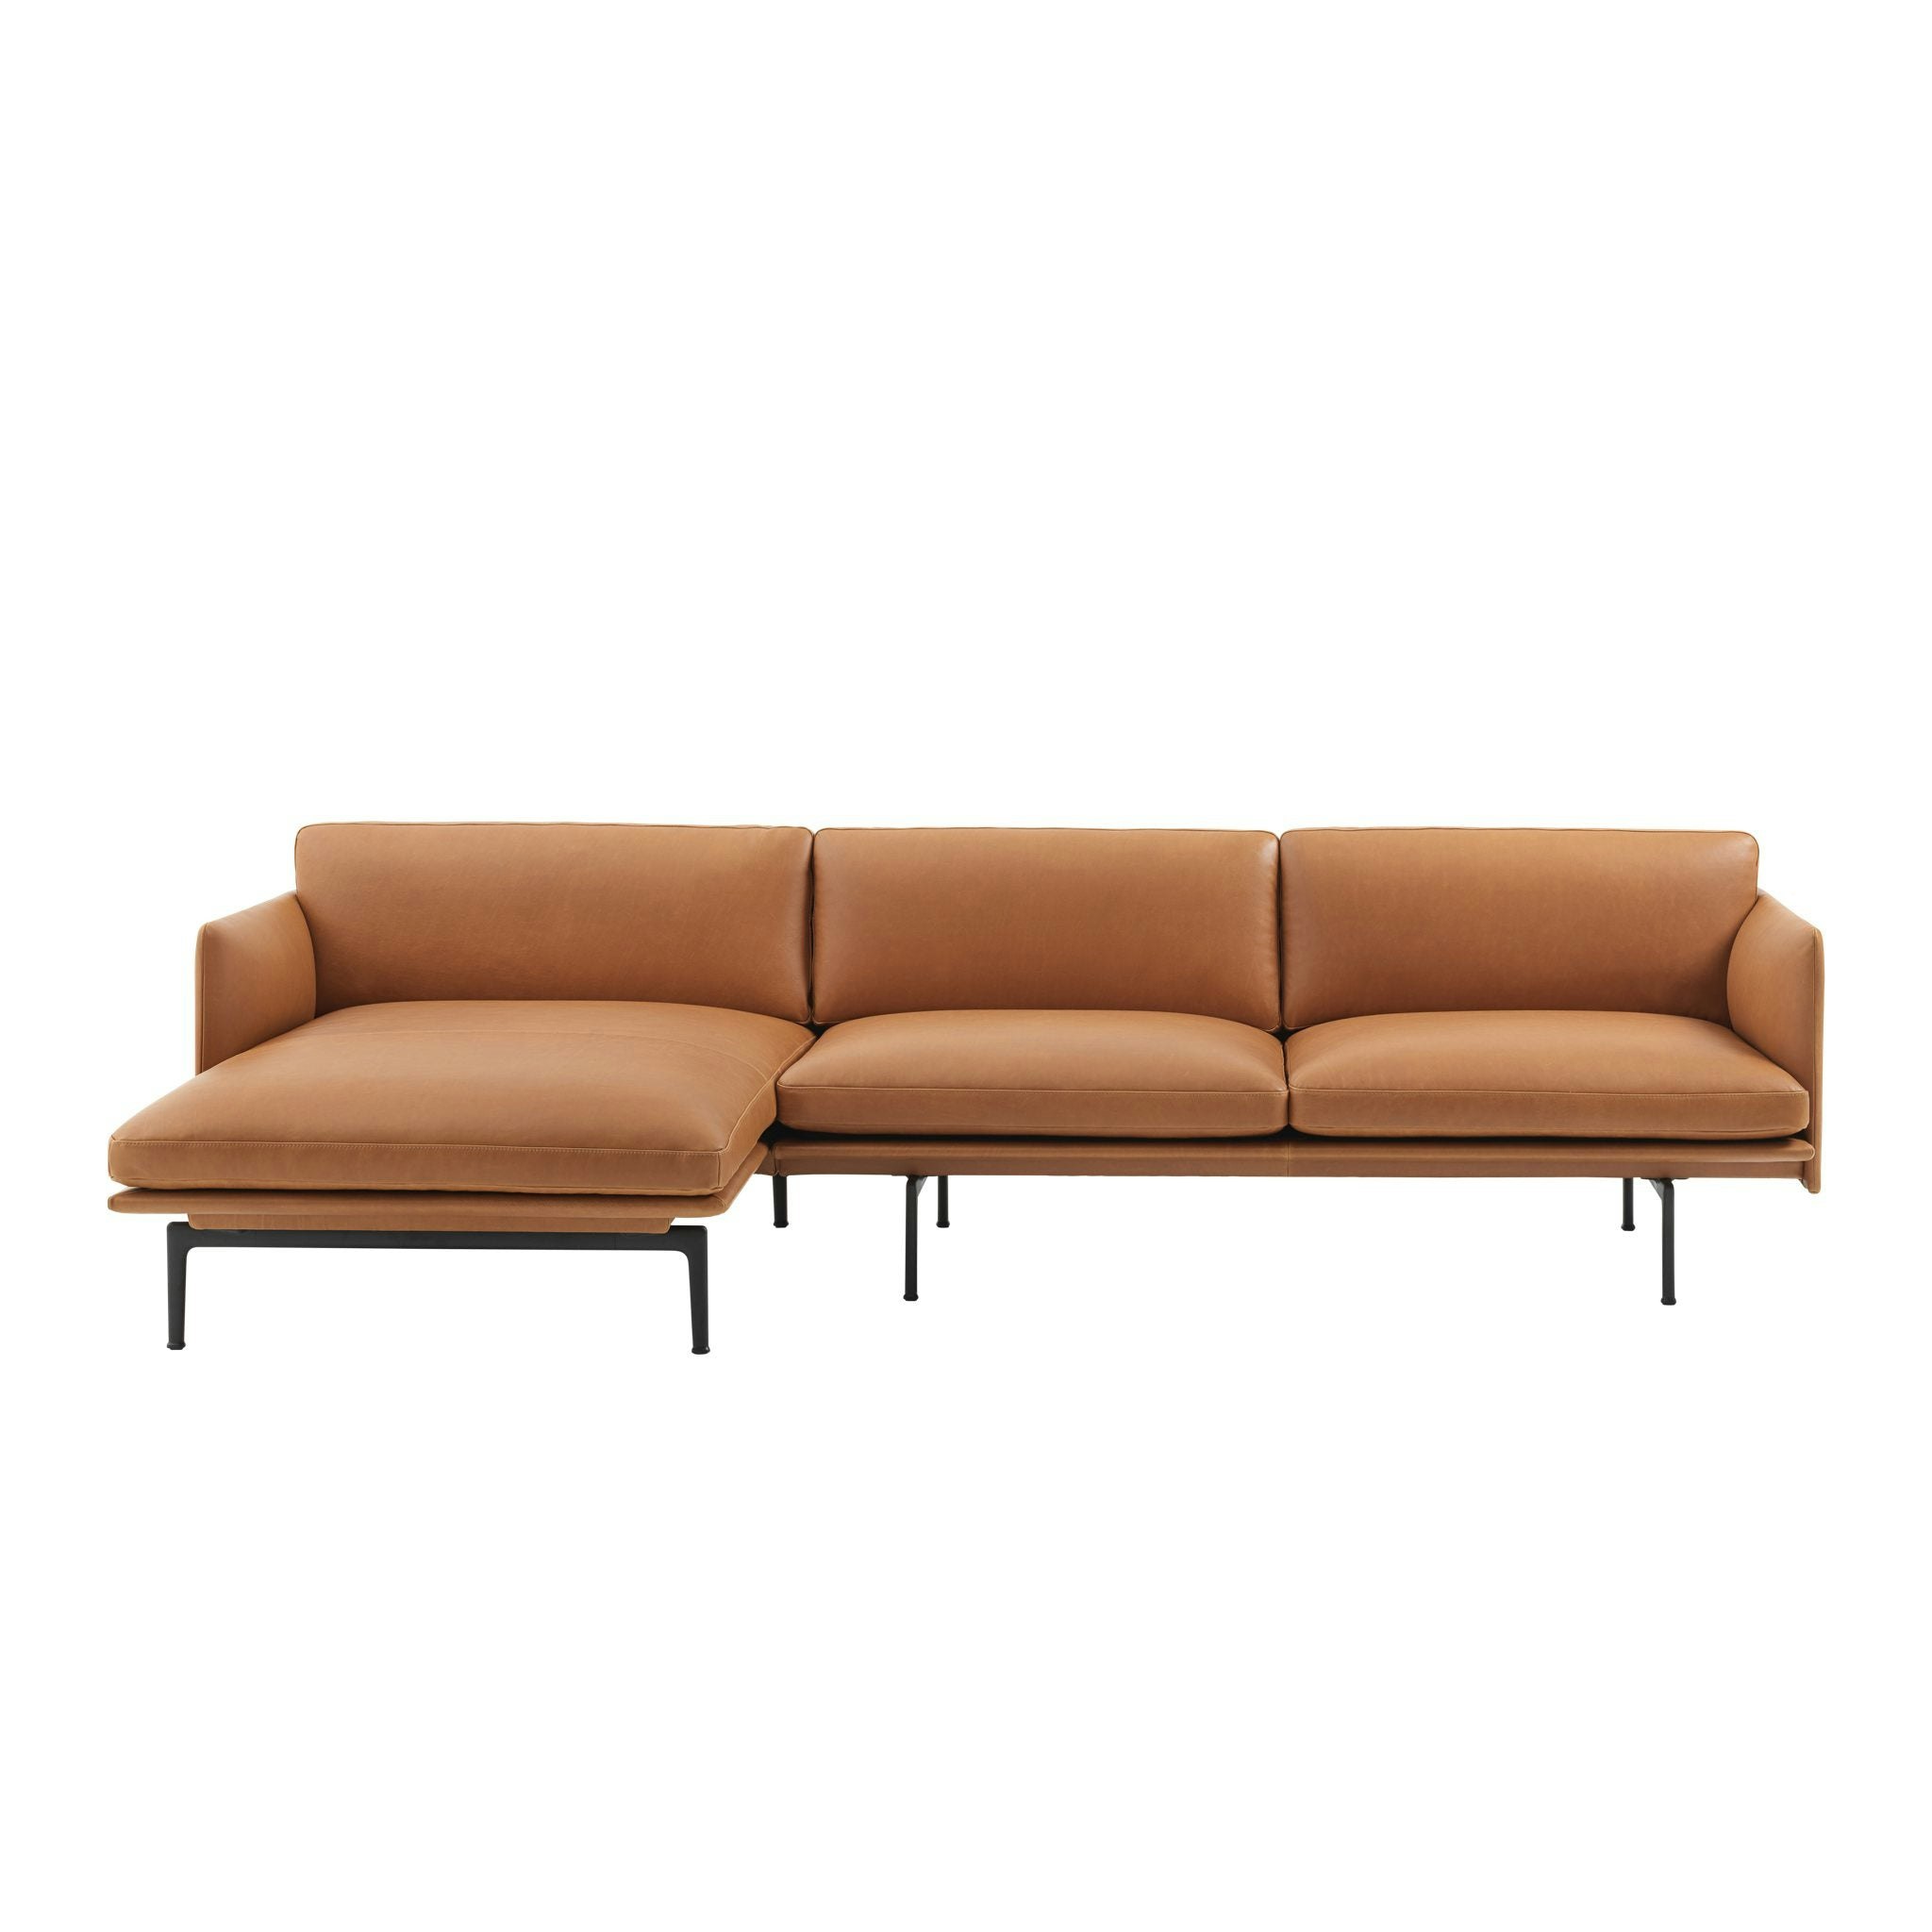 Outline Sofa with Chaise Longue by Muuto